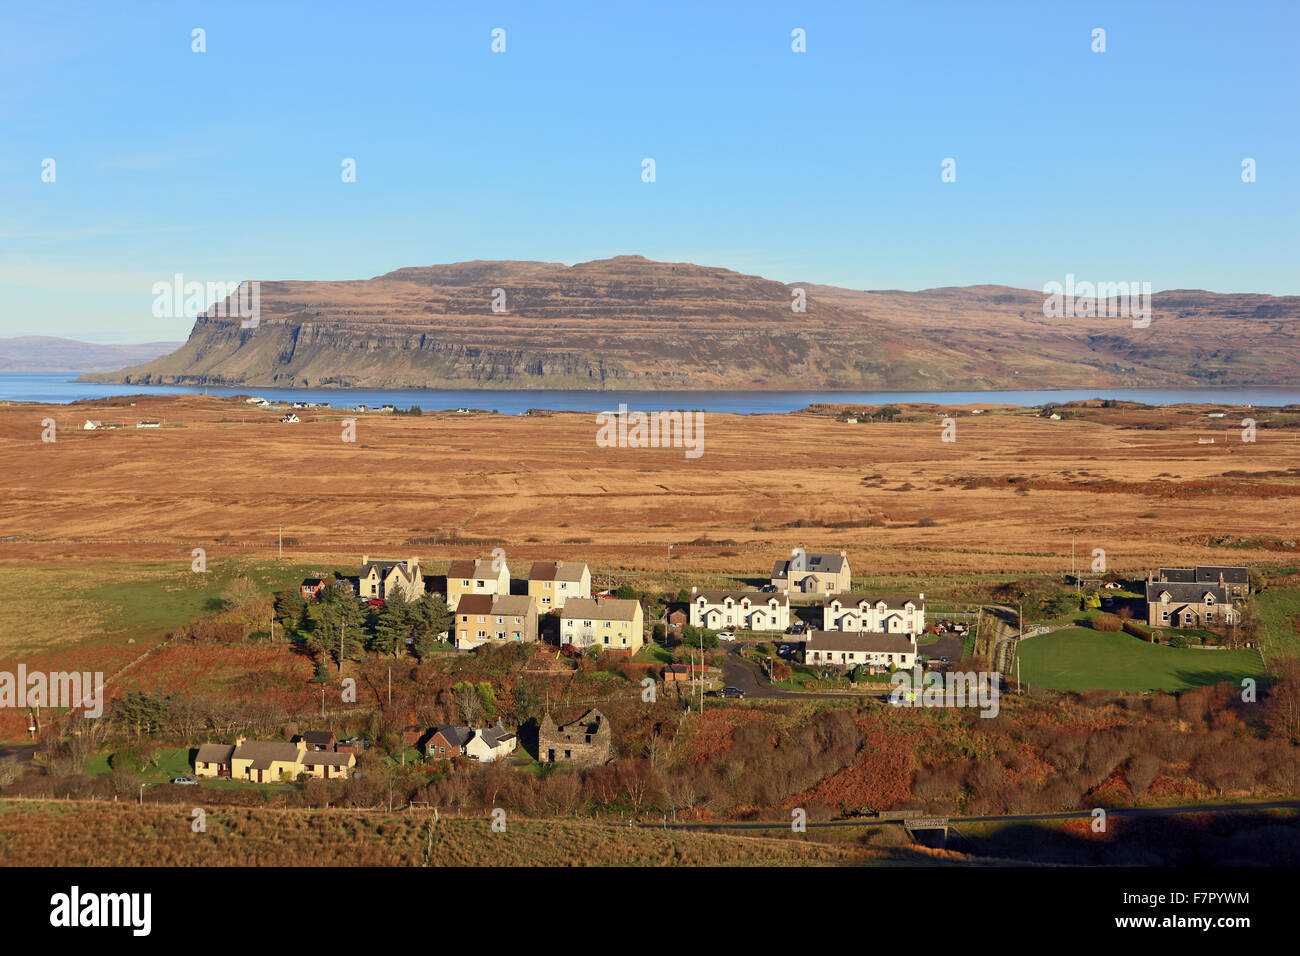 Isle of Mull - The Burg with, in front, houses from the village of Bunessan on the Ross of Mull Stock Photo